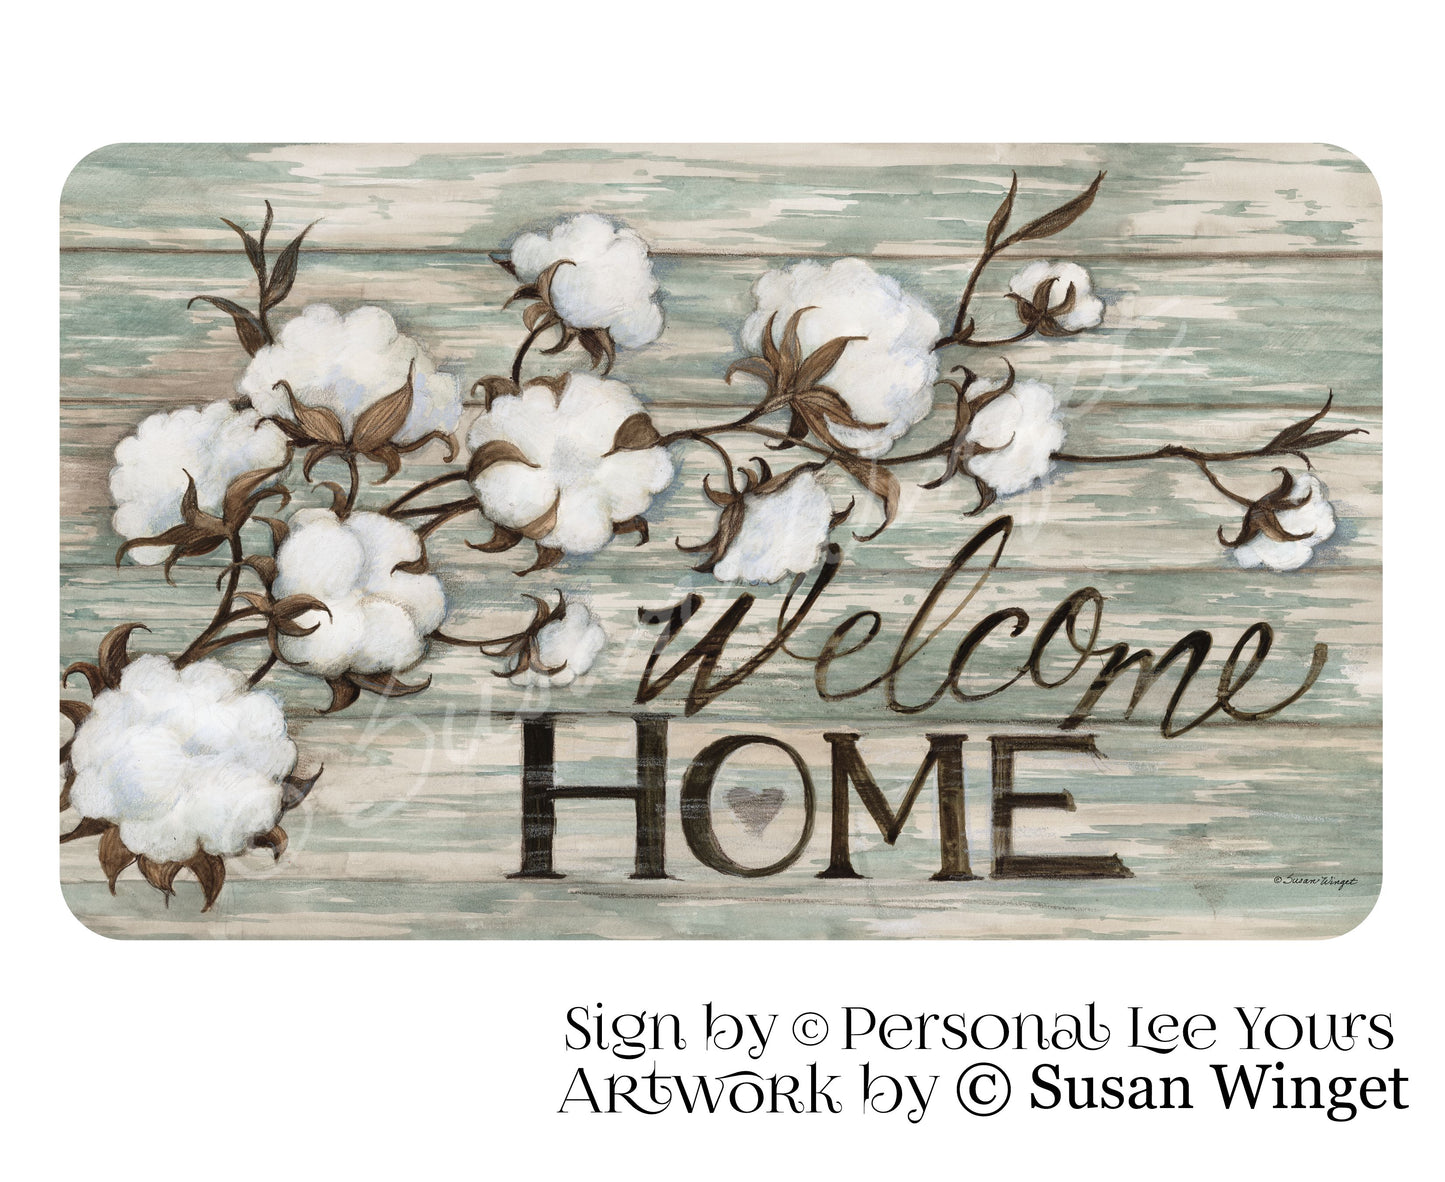 Susan Winget Exclusive Sign * Welcome Home * Cotton Bolls * 3 Sizes * Lightweight Metal